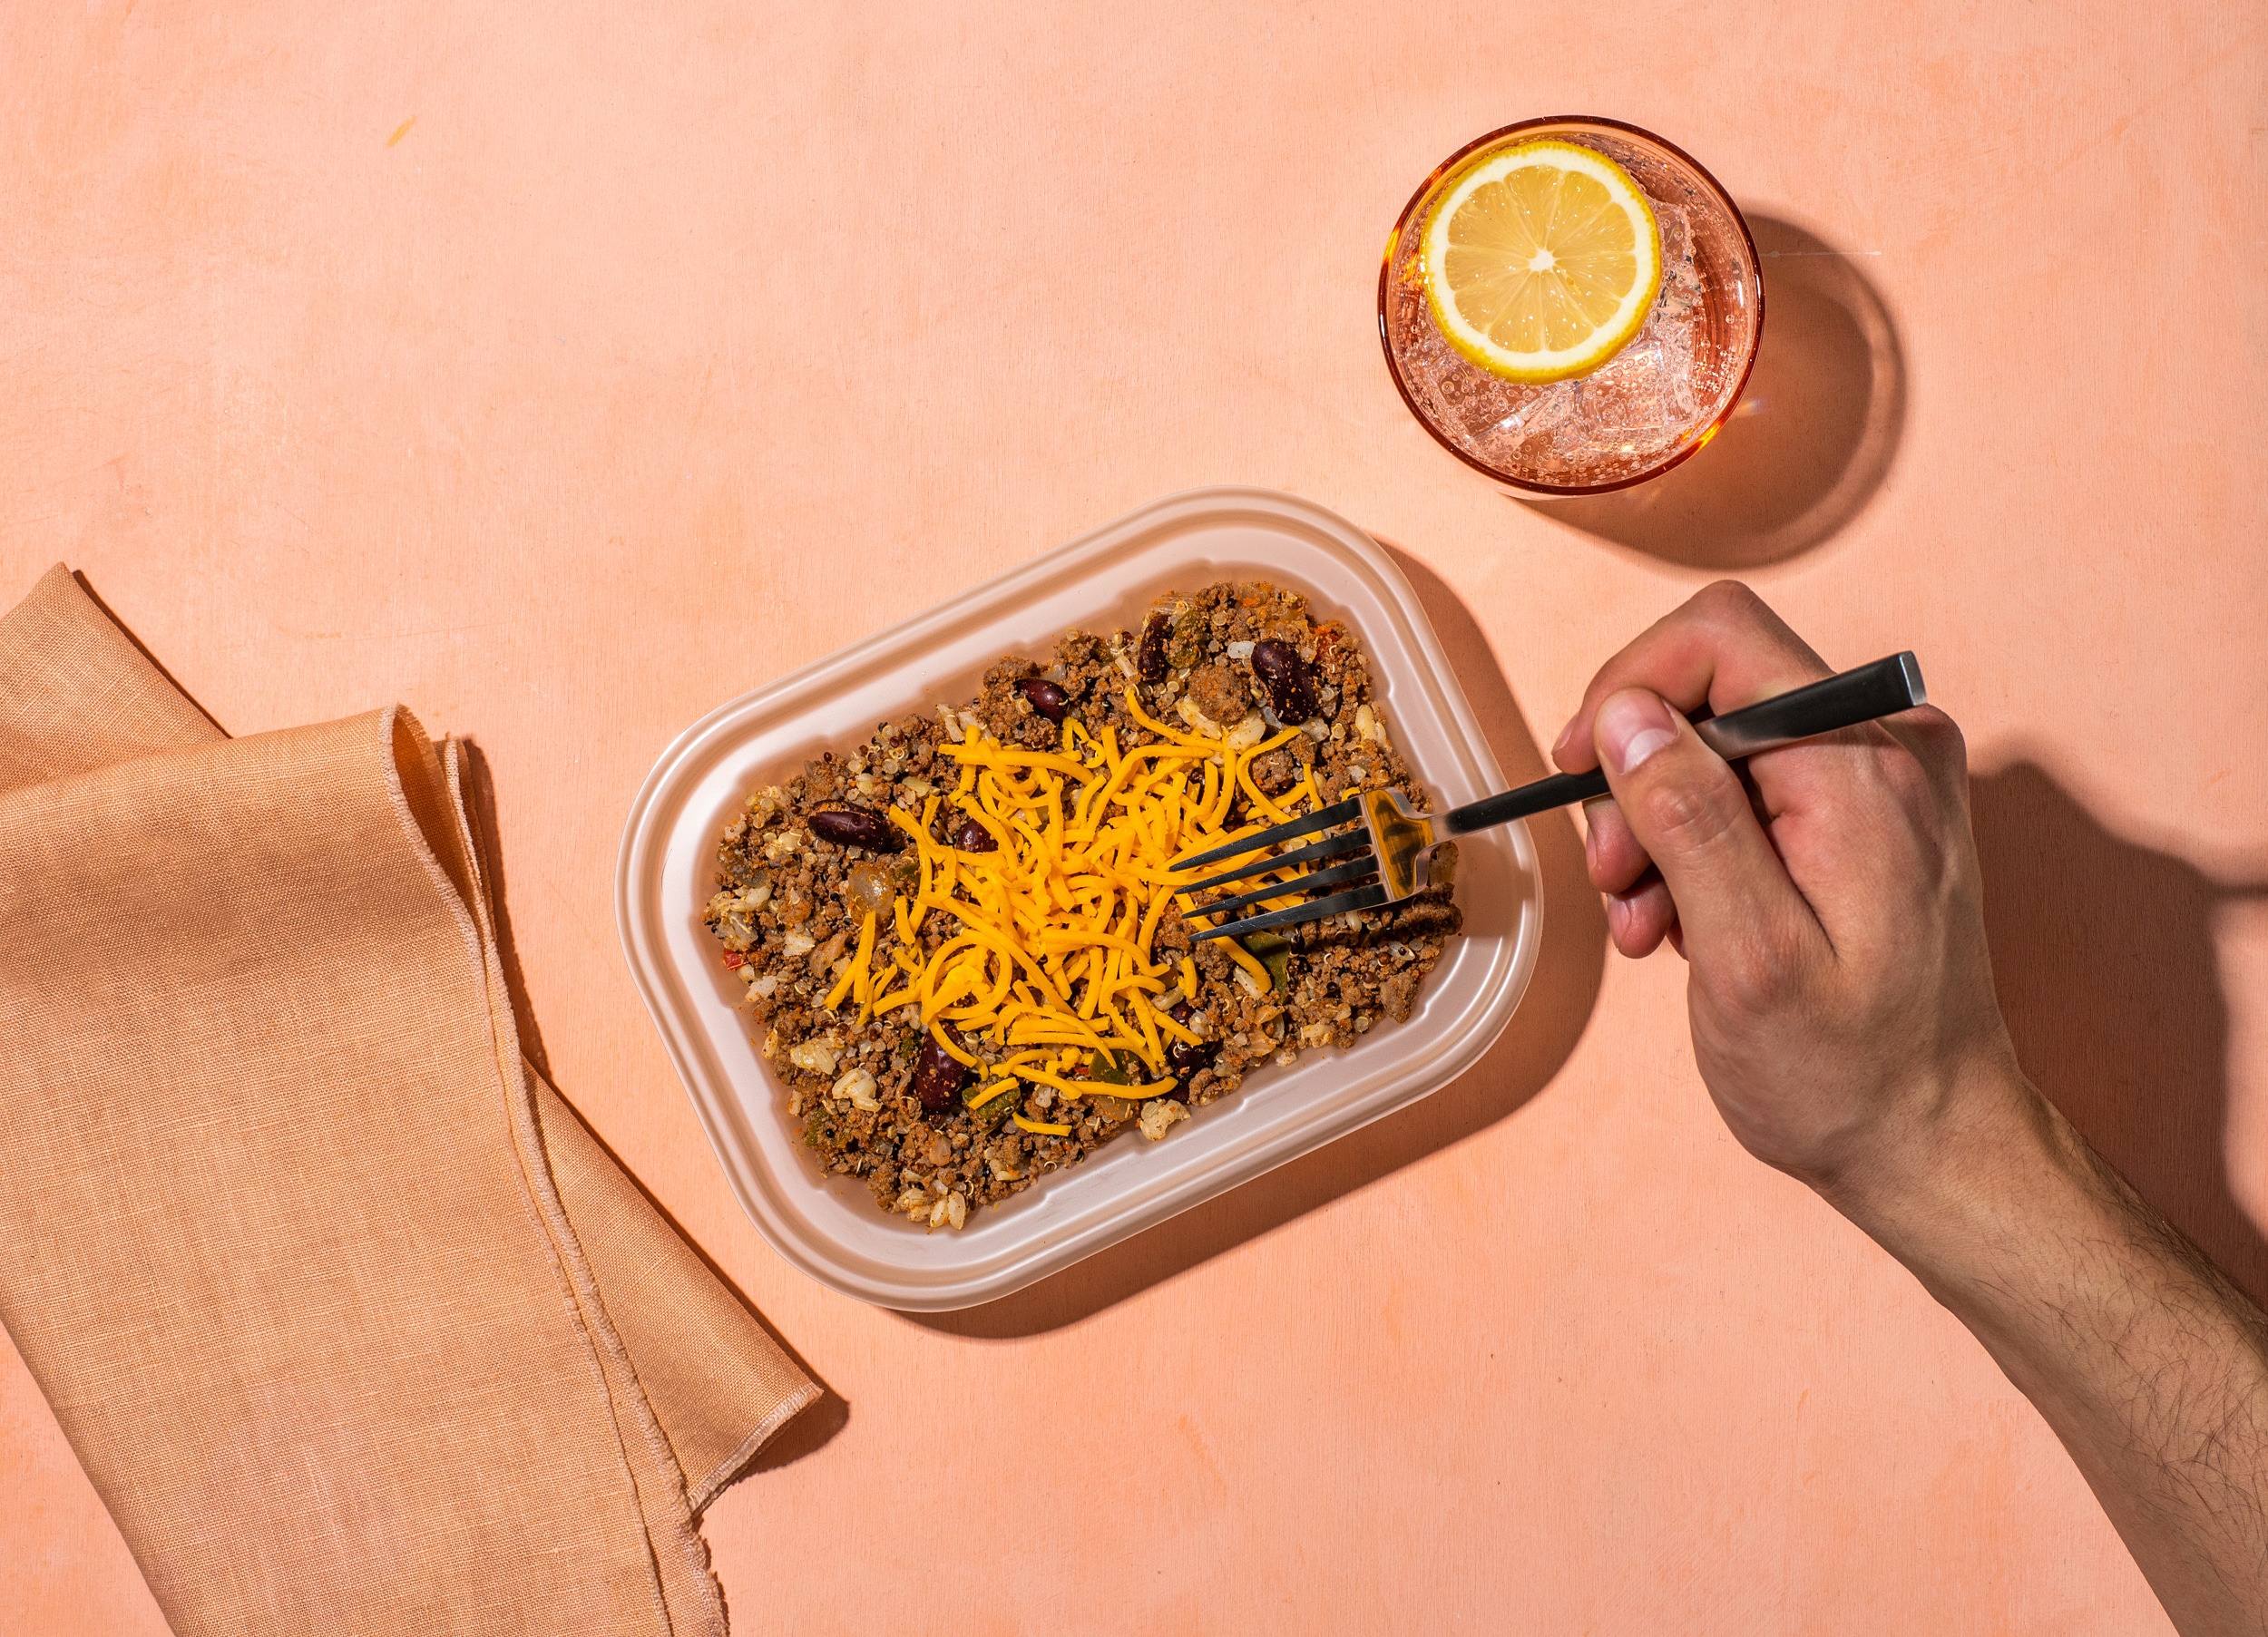 Bison quinoa bowl on a light pink background with a glass of water and someone's hand holding a fork